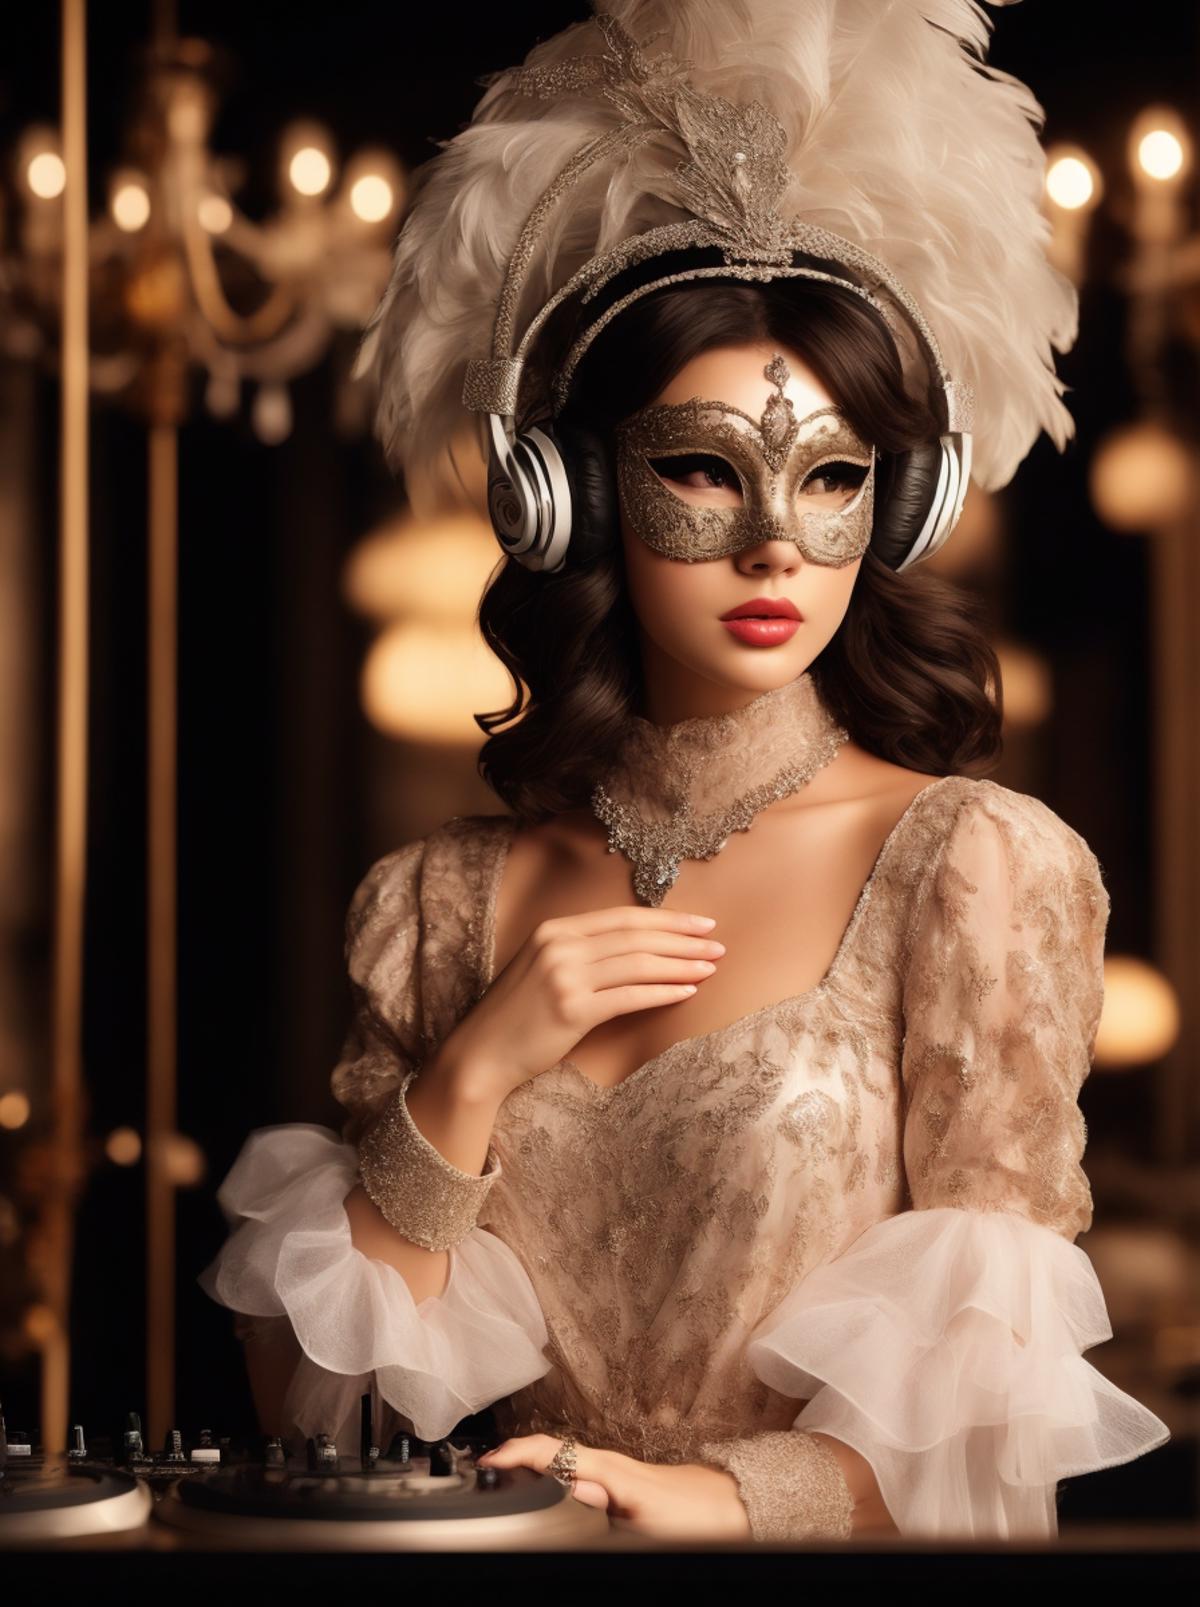 A woman wearing a mask and headphones with a lacy dress.